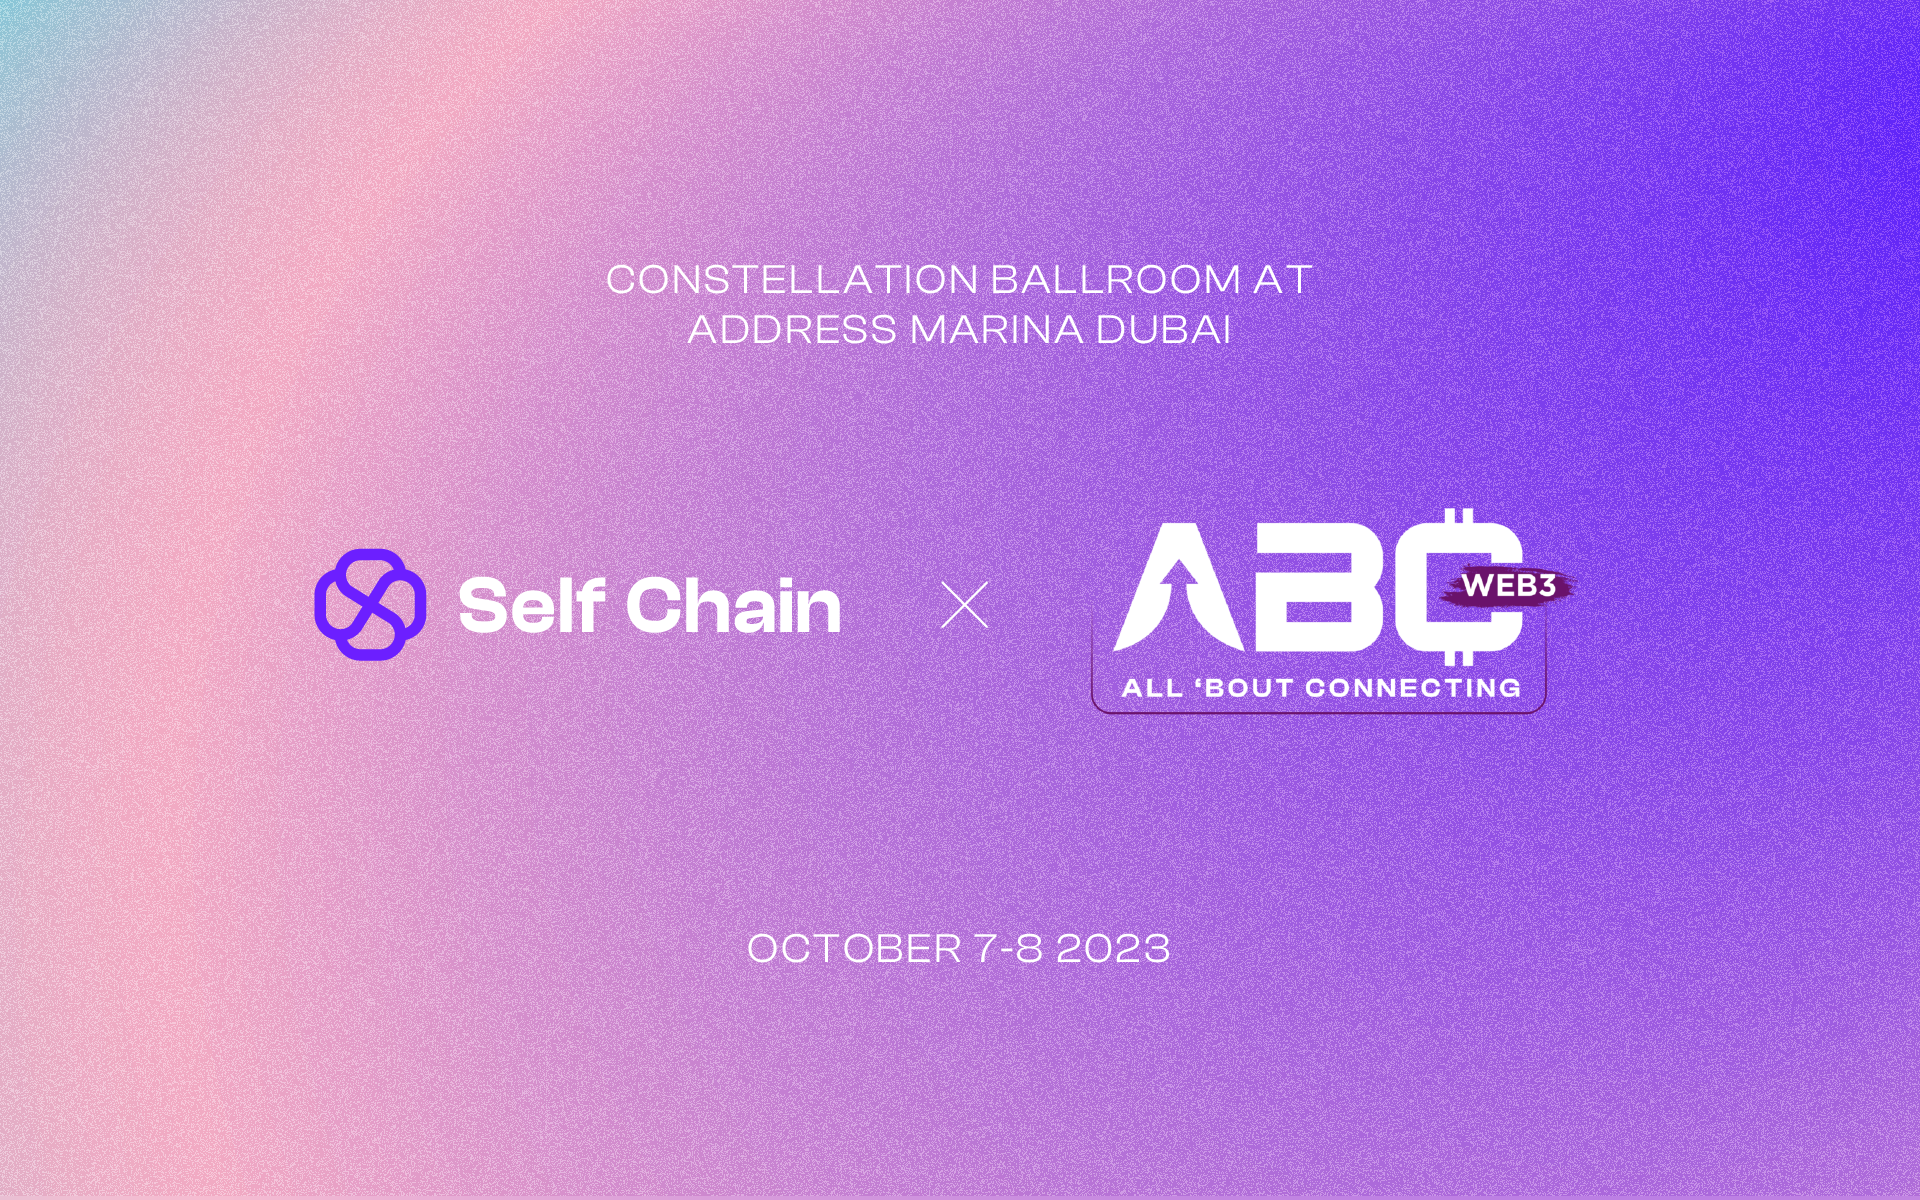 Self Chain Announced as Title Sponsor for ABC Conclave 2023